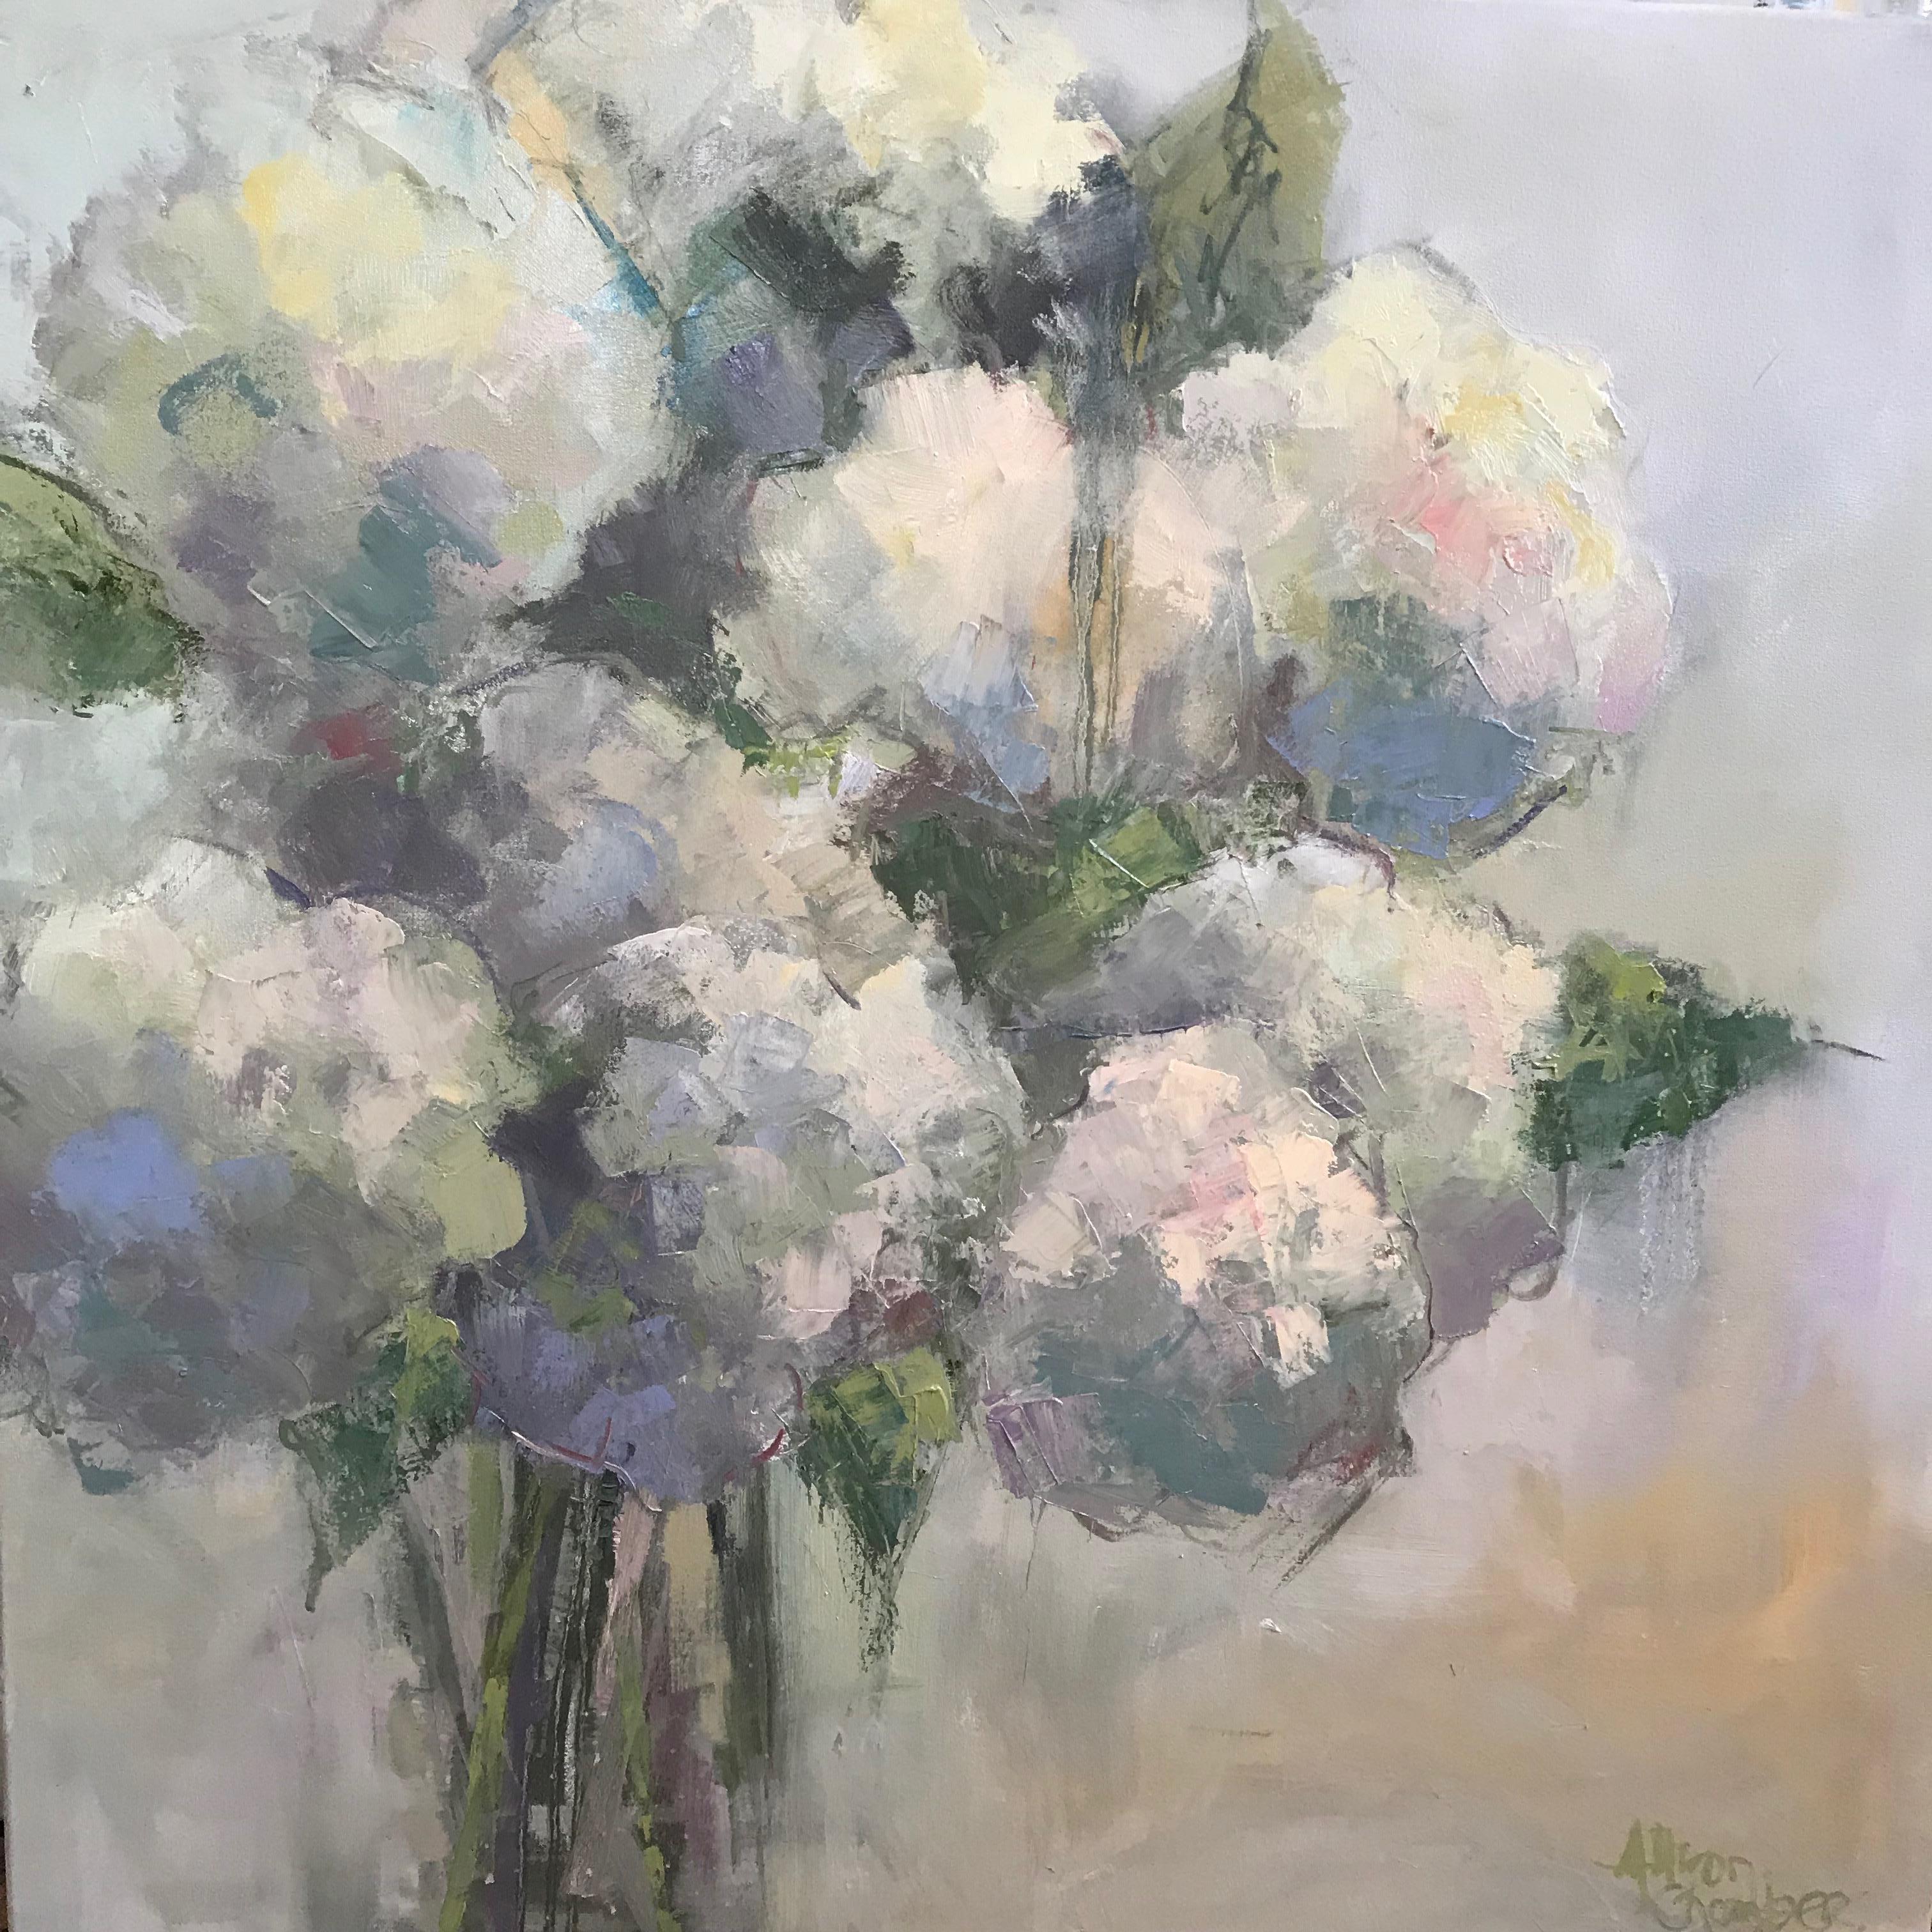 'My Sweetheart' is a framed oil on canvas Impressionist floral painting of square format created by American artist Allison Chambers in 2020. Featuring a palette made of white, green, grey, violet and beige tones, the painting depicts an exquisite